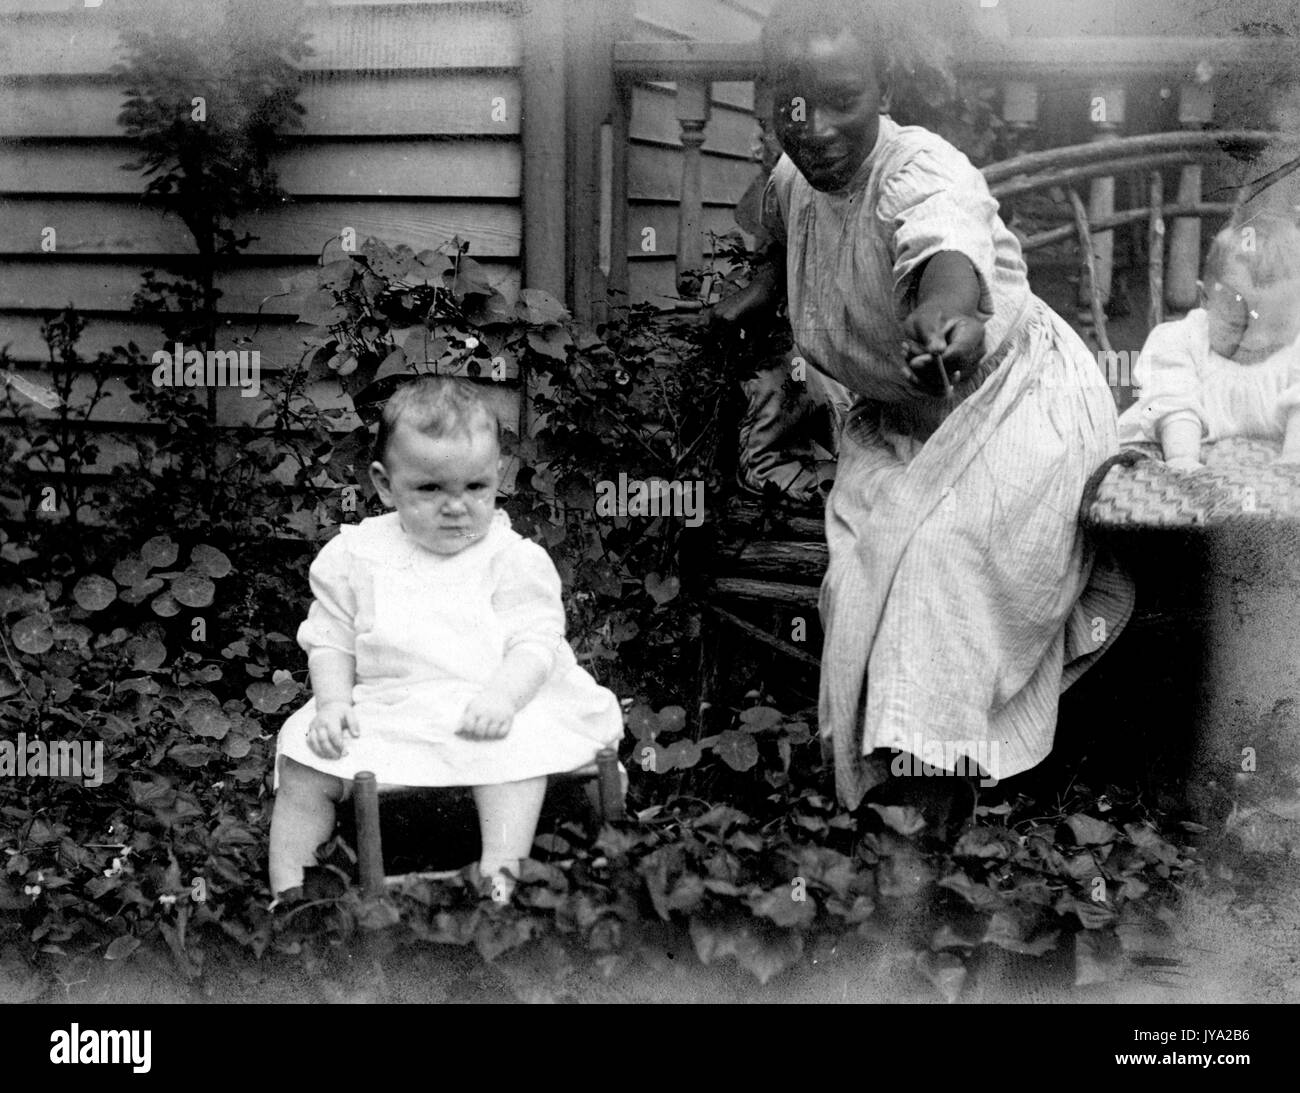 African-American nanny in a garden beside a home, wearing a plain dress and holding out a flower, with two young Caucasian babies, 1910. Stock Photo